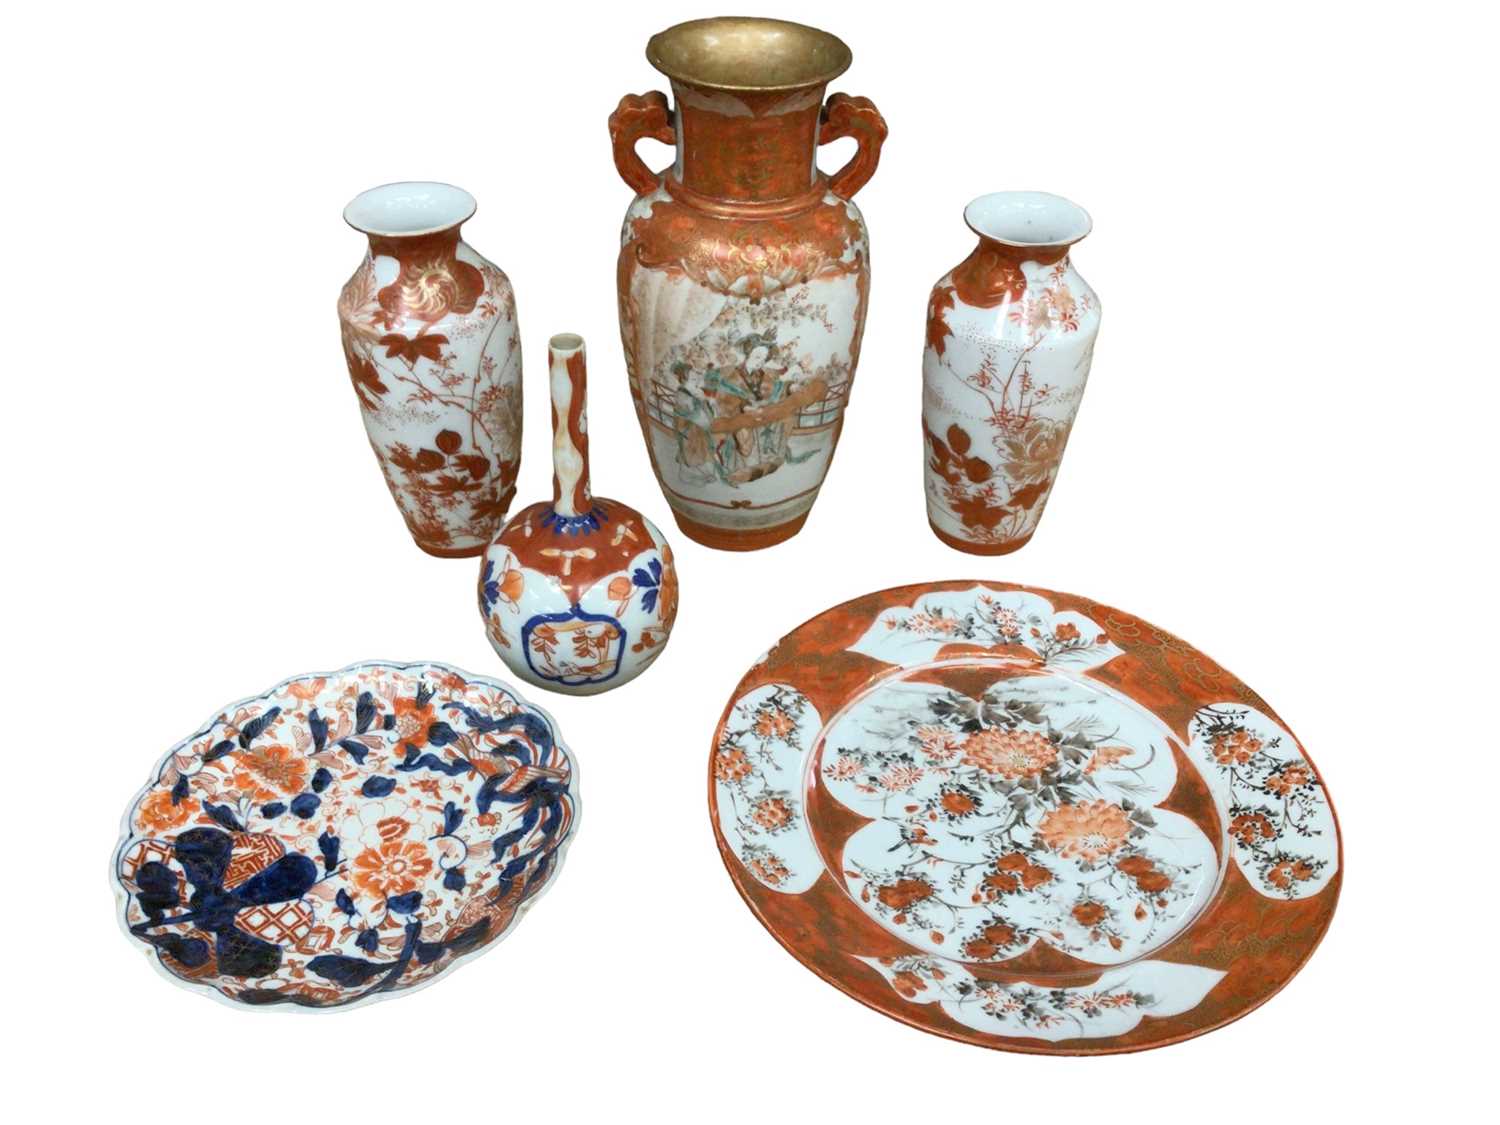 Lot 16 - Small group of Japanese Kutani and Imari ware, including a two handled vase decorated with a figural scene